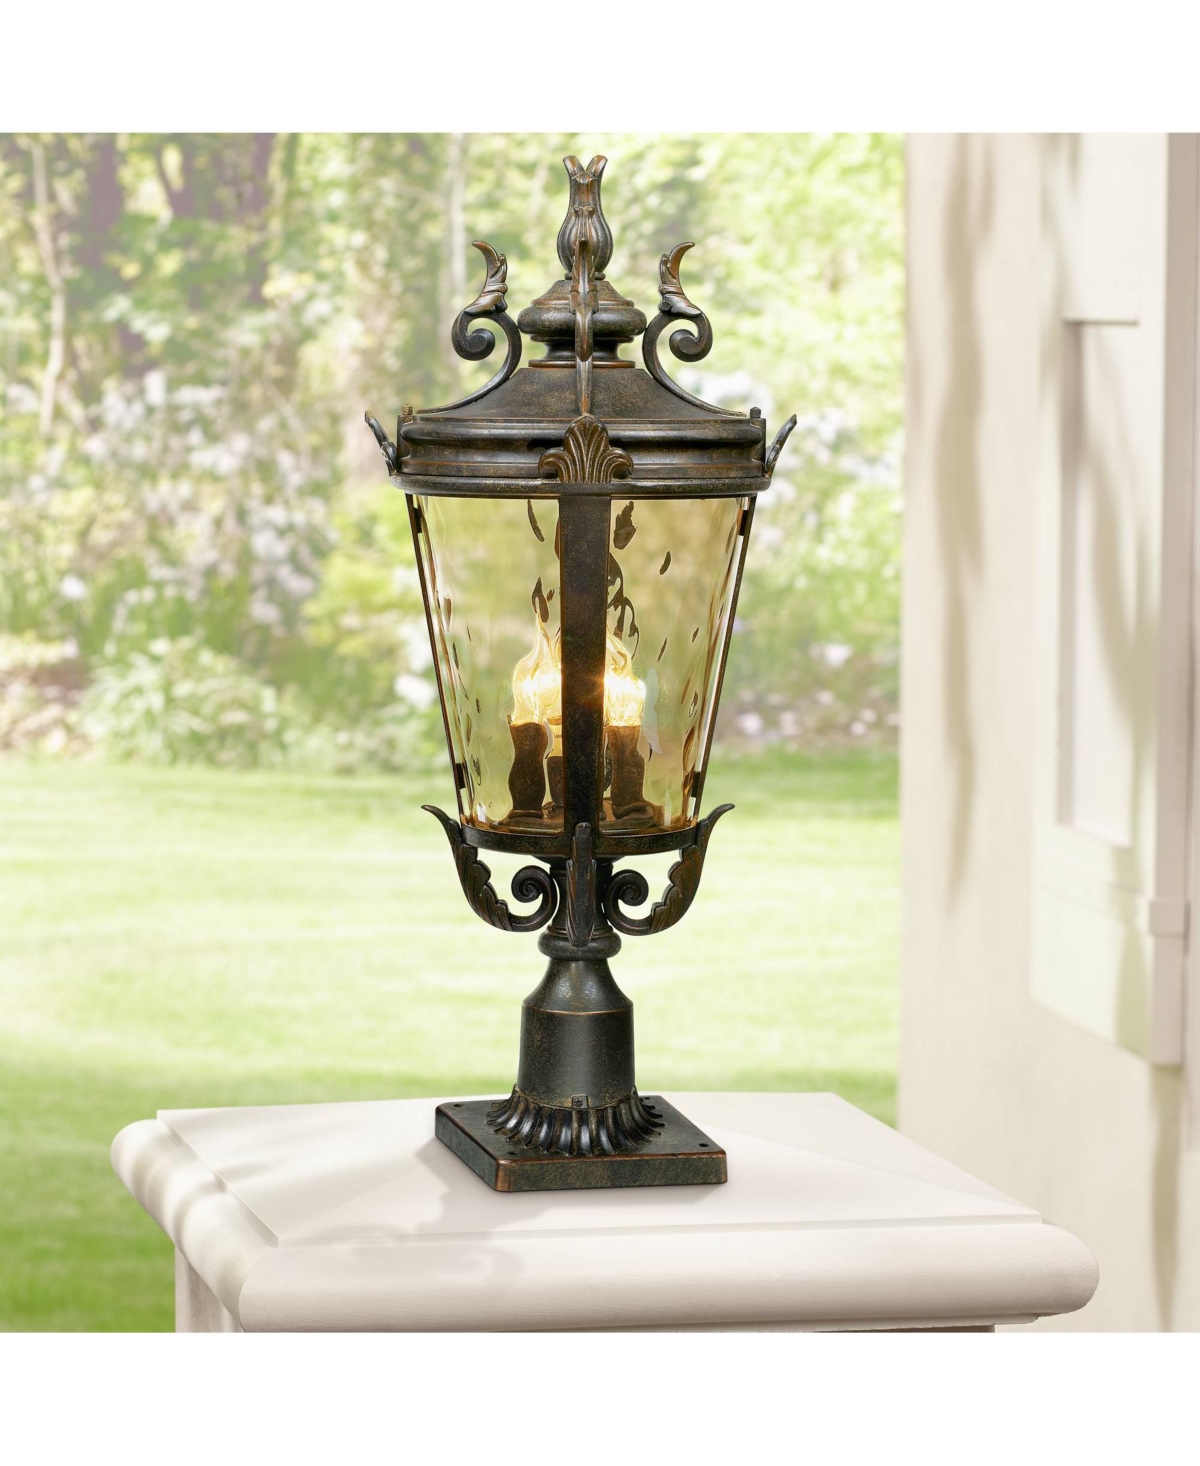 Marseille Rustic Industrial Post Light Pier Mount Fixture Veranda Bronze Scroll 27" Champagne Hammered Glass for Exterior House Porch Patio Outside De